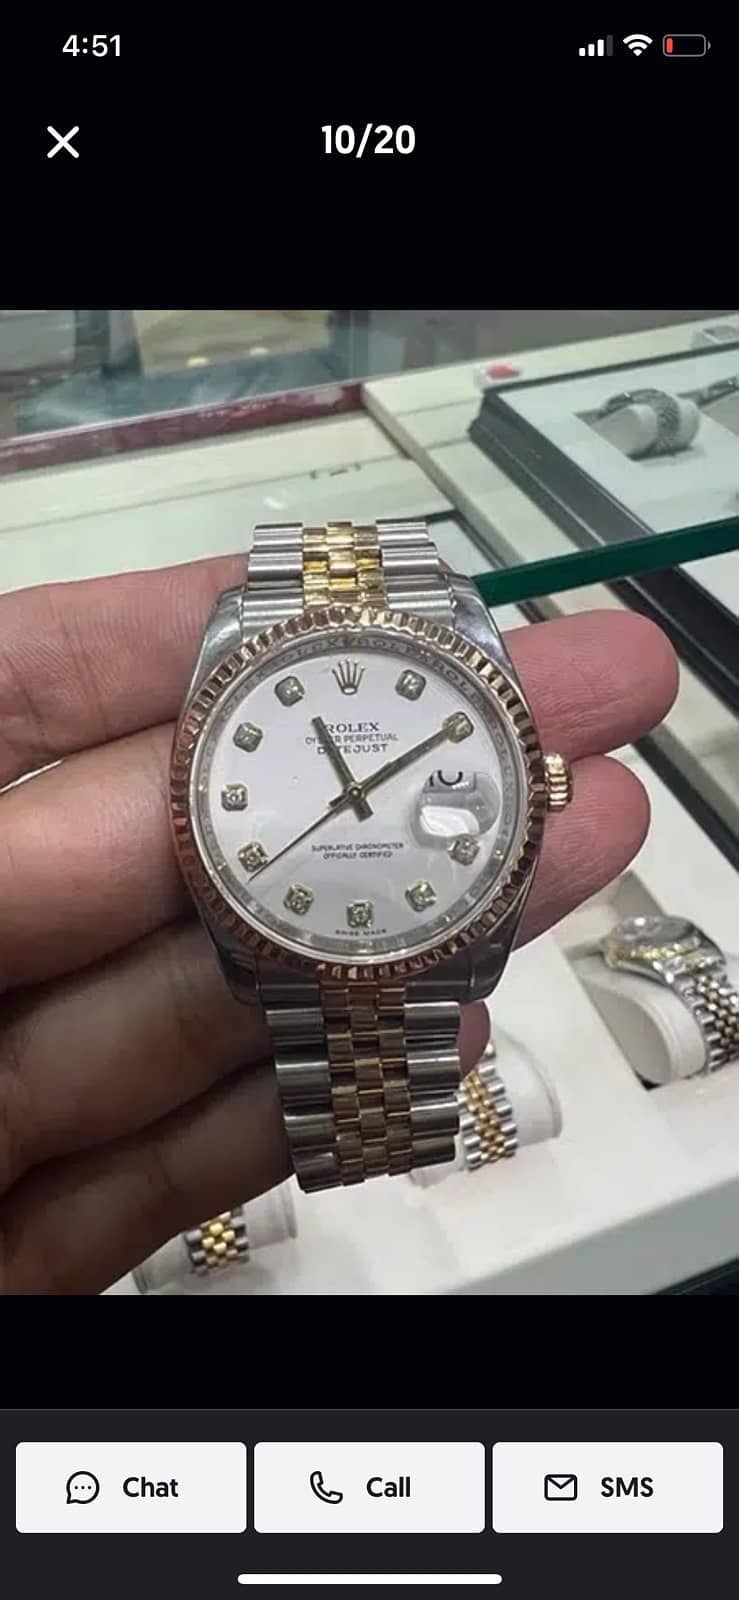 MOST Trusted Name In Swiss Watches BUYER Rolex Cartier Omega 18